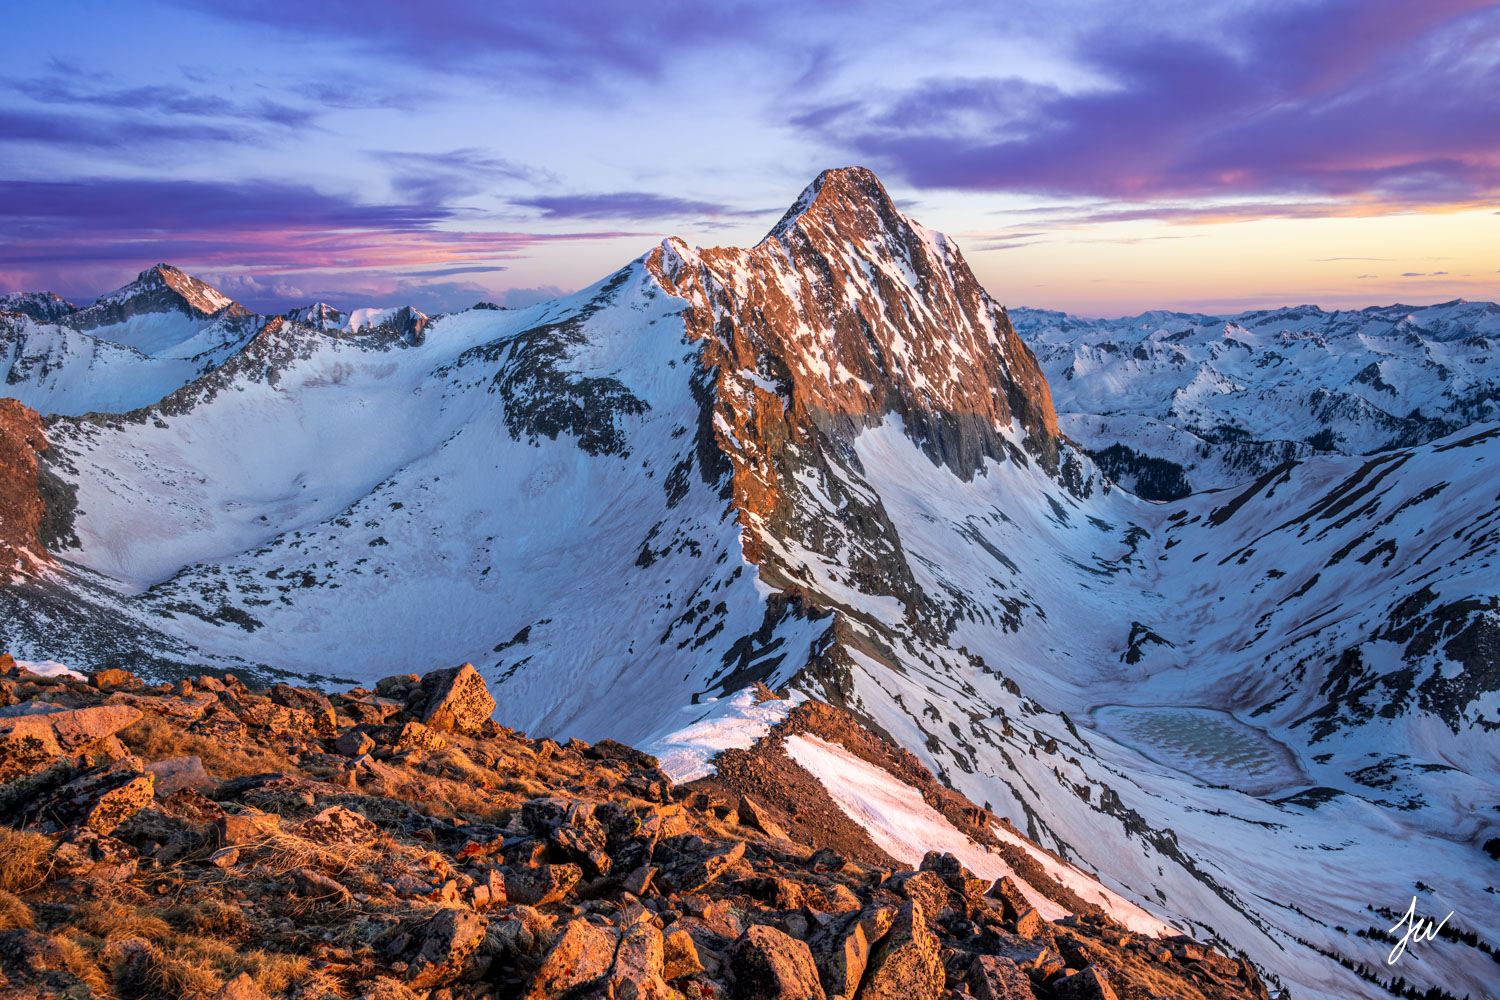 Sunset on Capitol Peak in the Elk Mountains of Colorado.